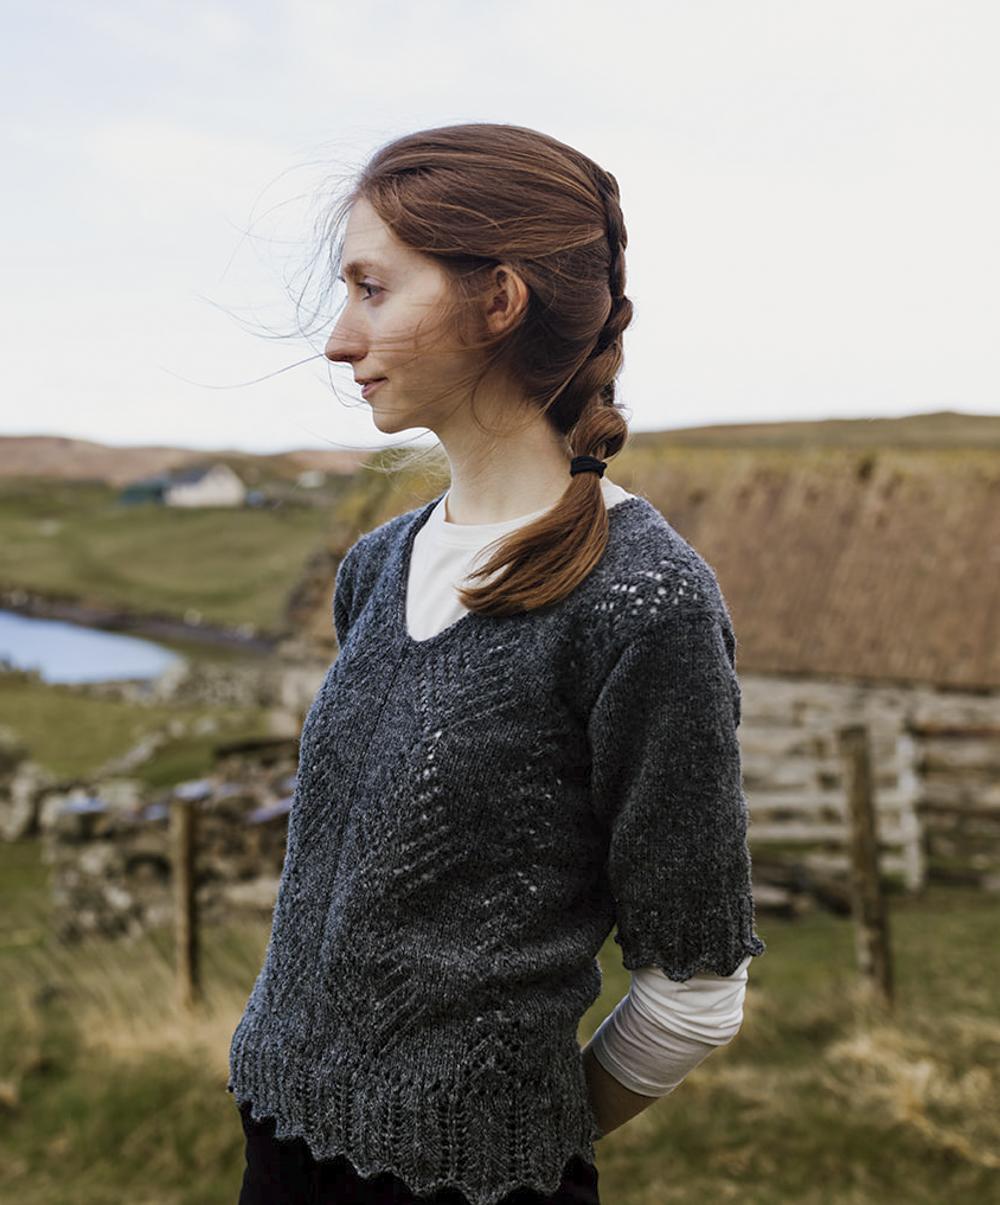 A woman with red hair stares off into the middle distance, behind her is a thatched croft house and she is wearing a lacy sheepy tunic, the colour of graphite